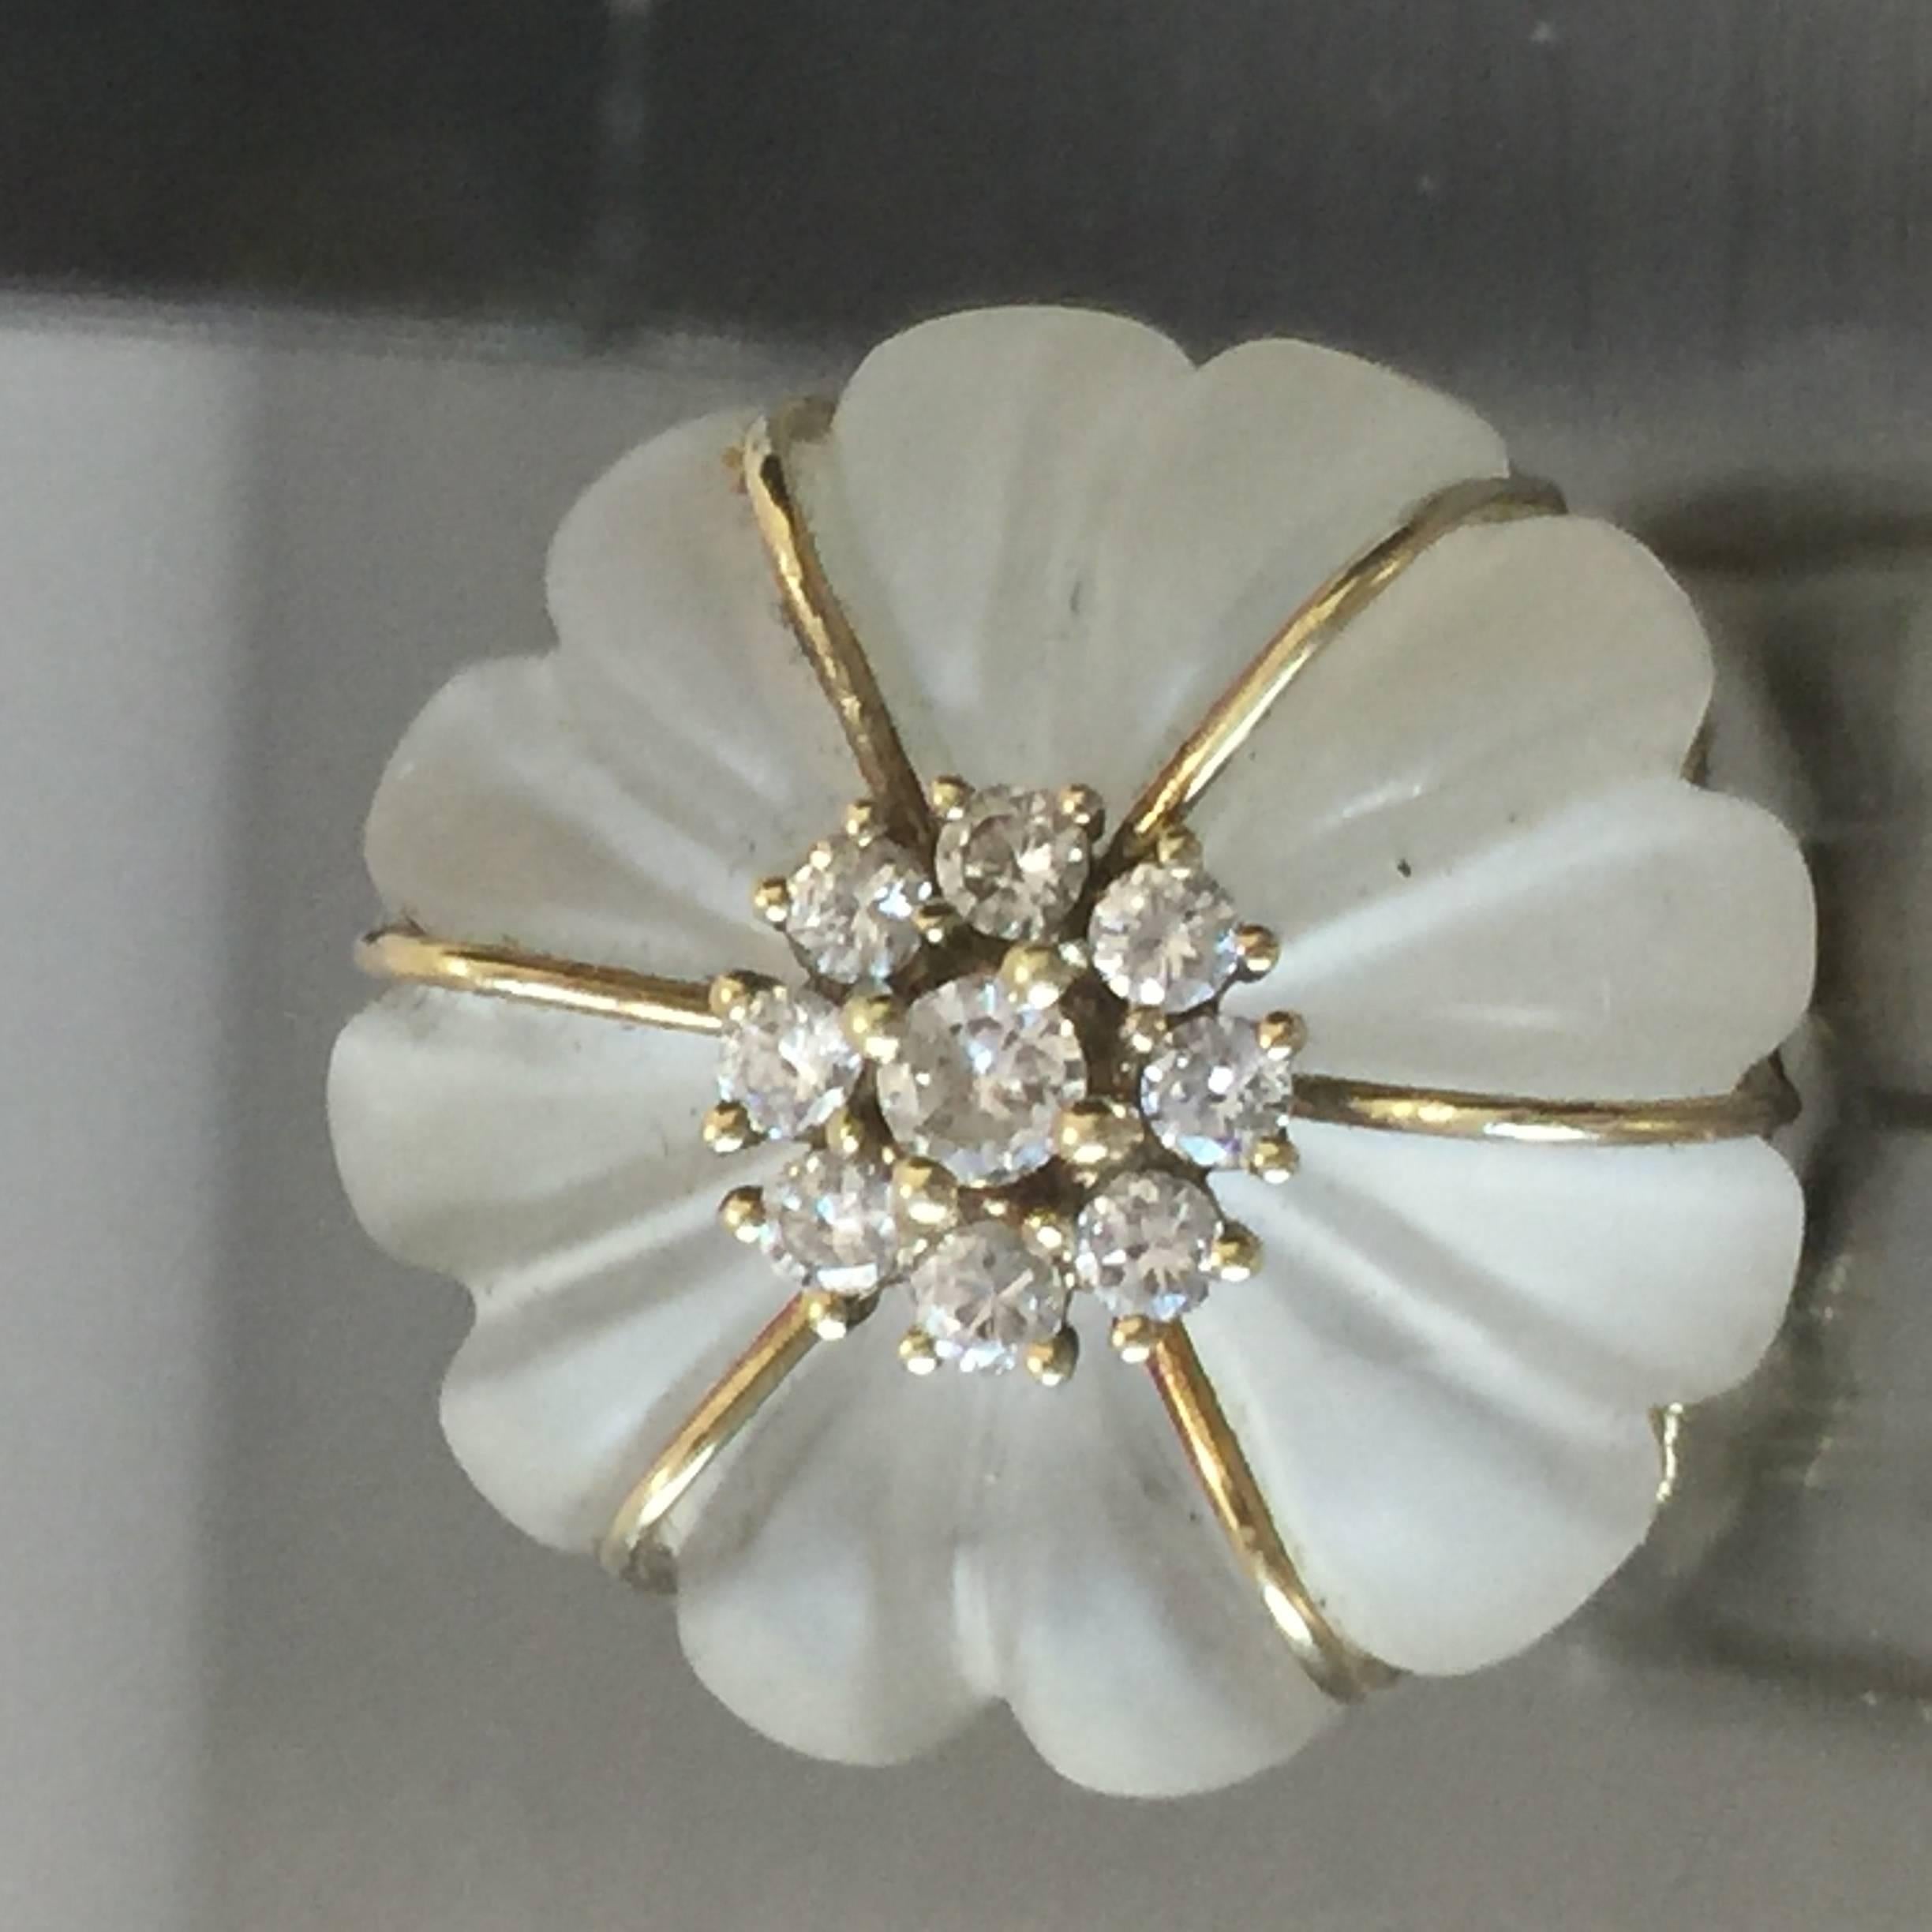 A most beautiful carved crystal set with a flower like diamond center and gold bands.
Piece is beautifully carved and is grand in scale.
This piece has inspiration from David Webb pieces and is very Palm Beach Glamour.
Ring is approx. 7.5 in